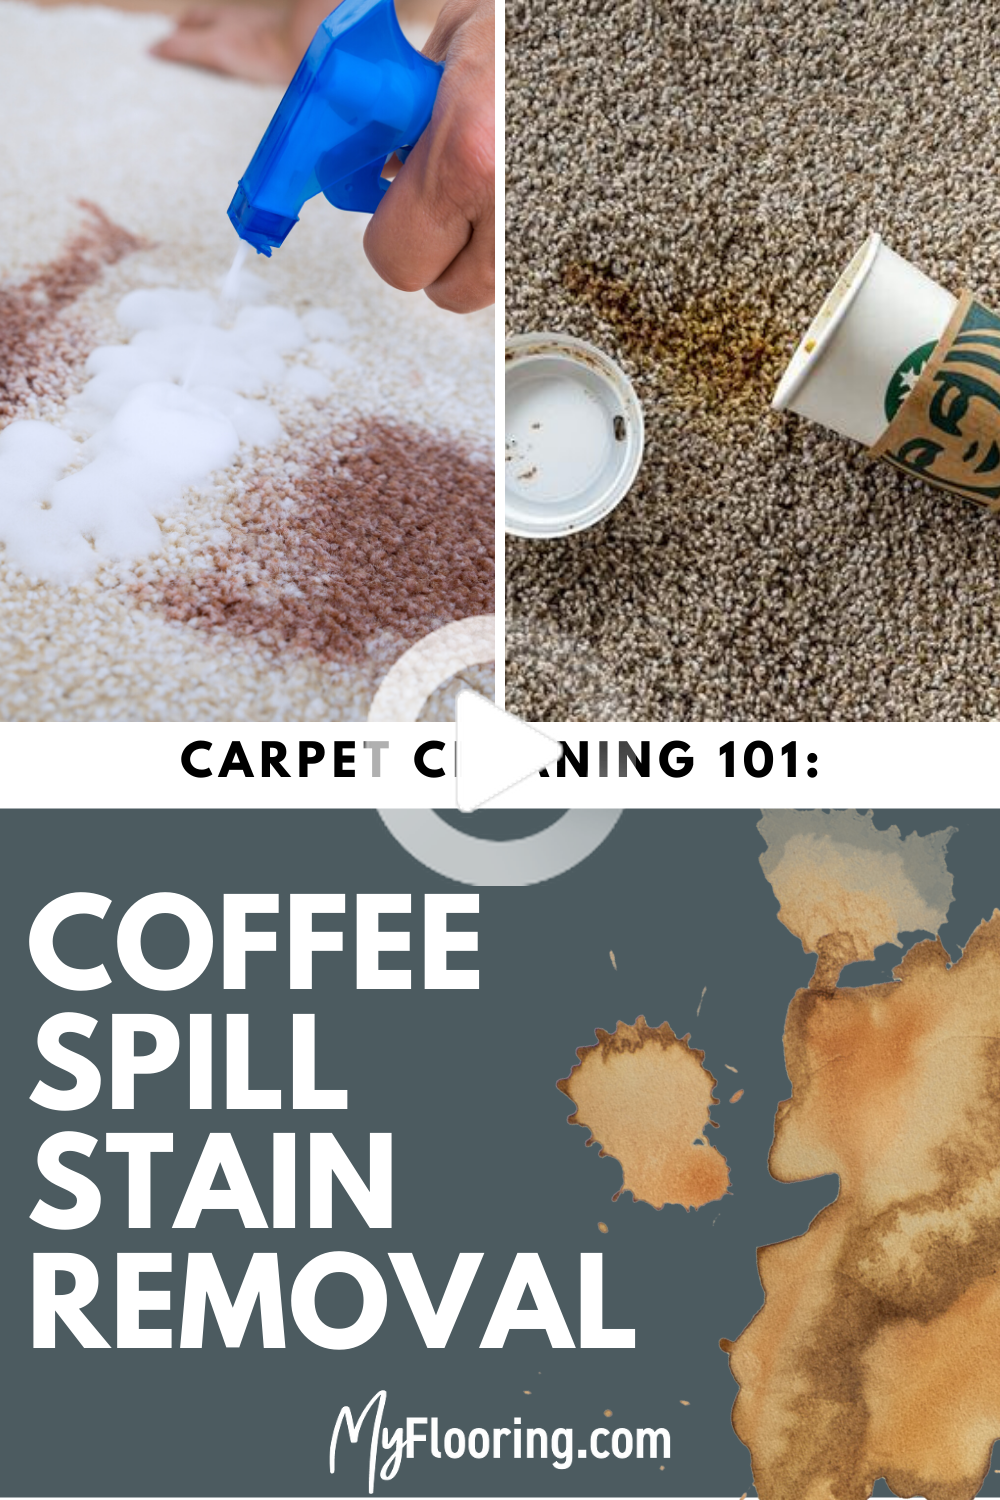 How to Get Coffee Stains out of Carpet